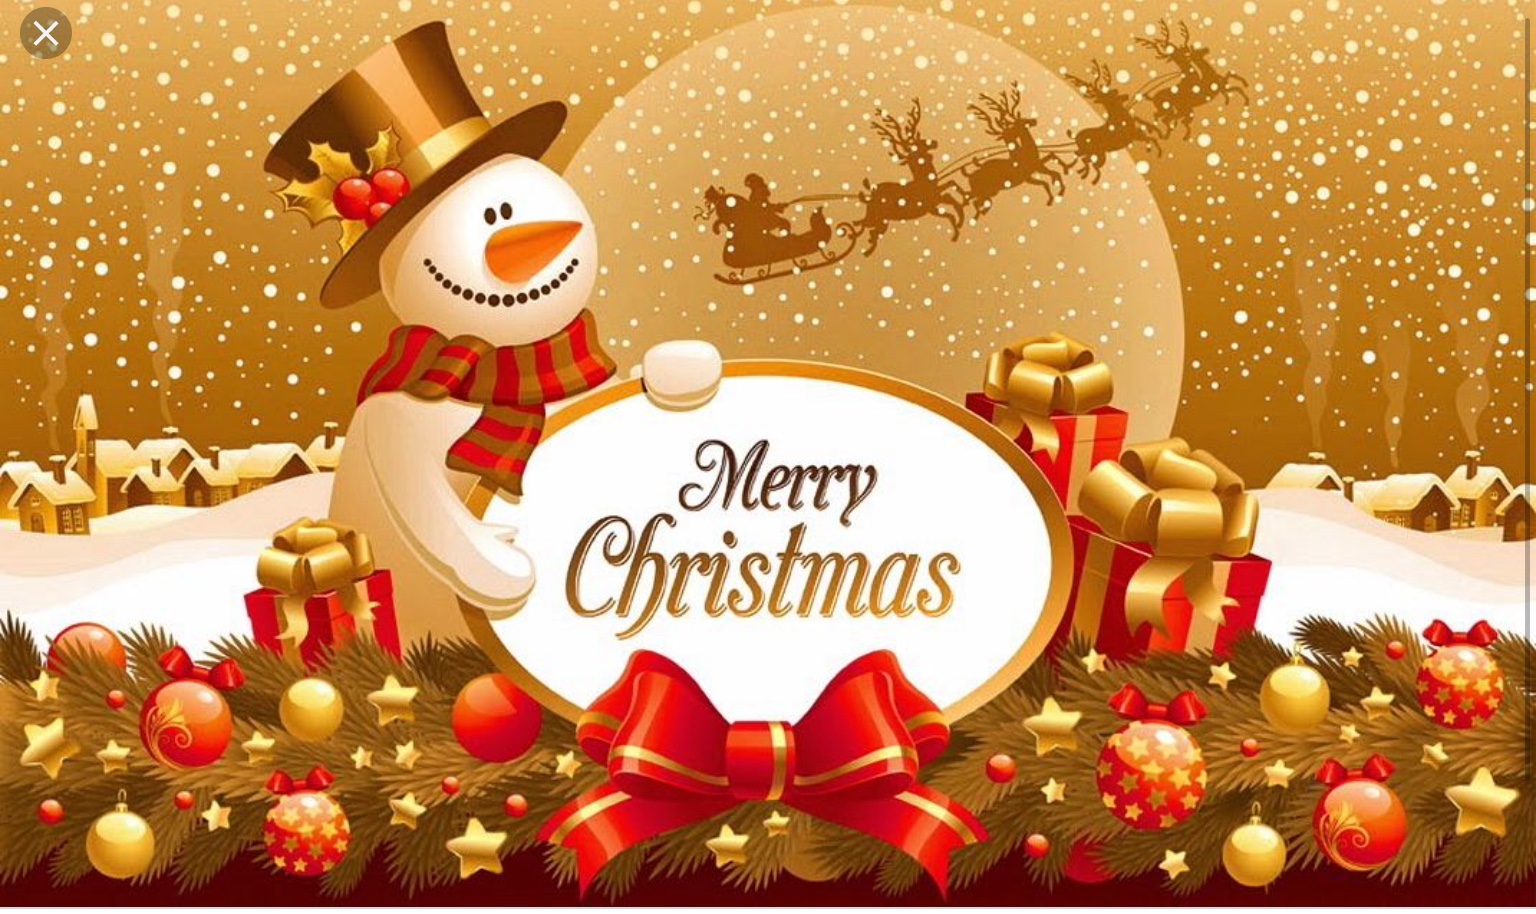 Kimmons Roofing would like to wish everyone a very Merry Christmas